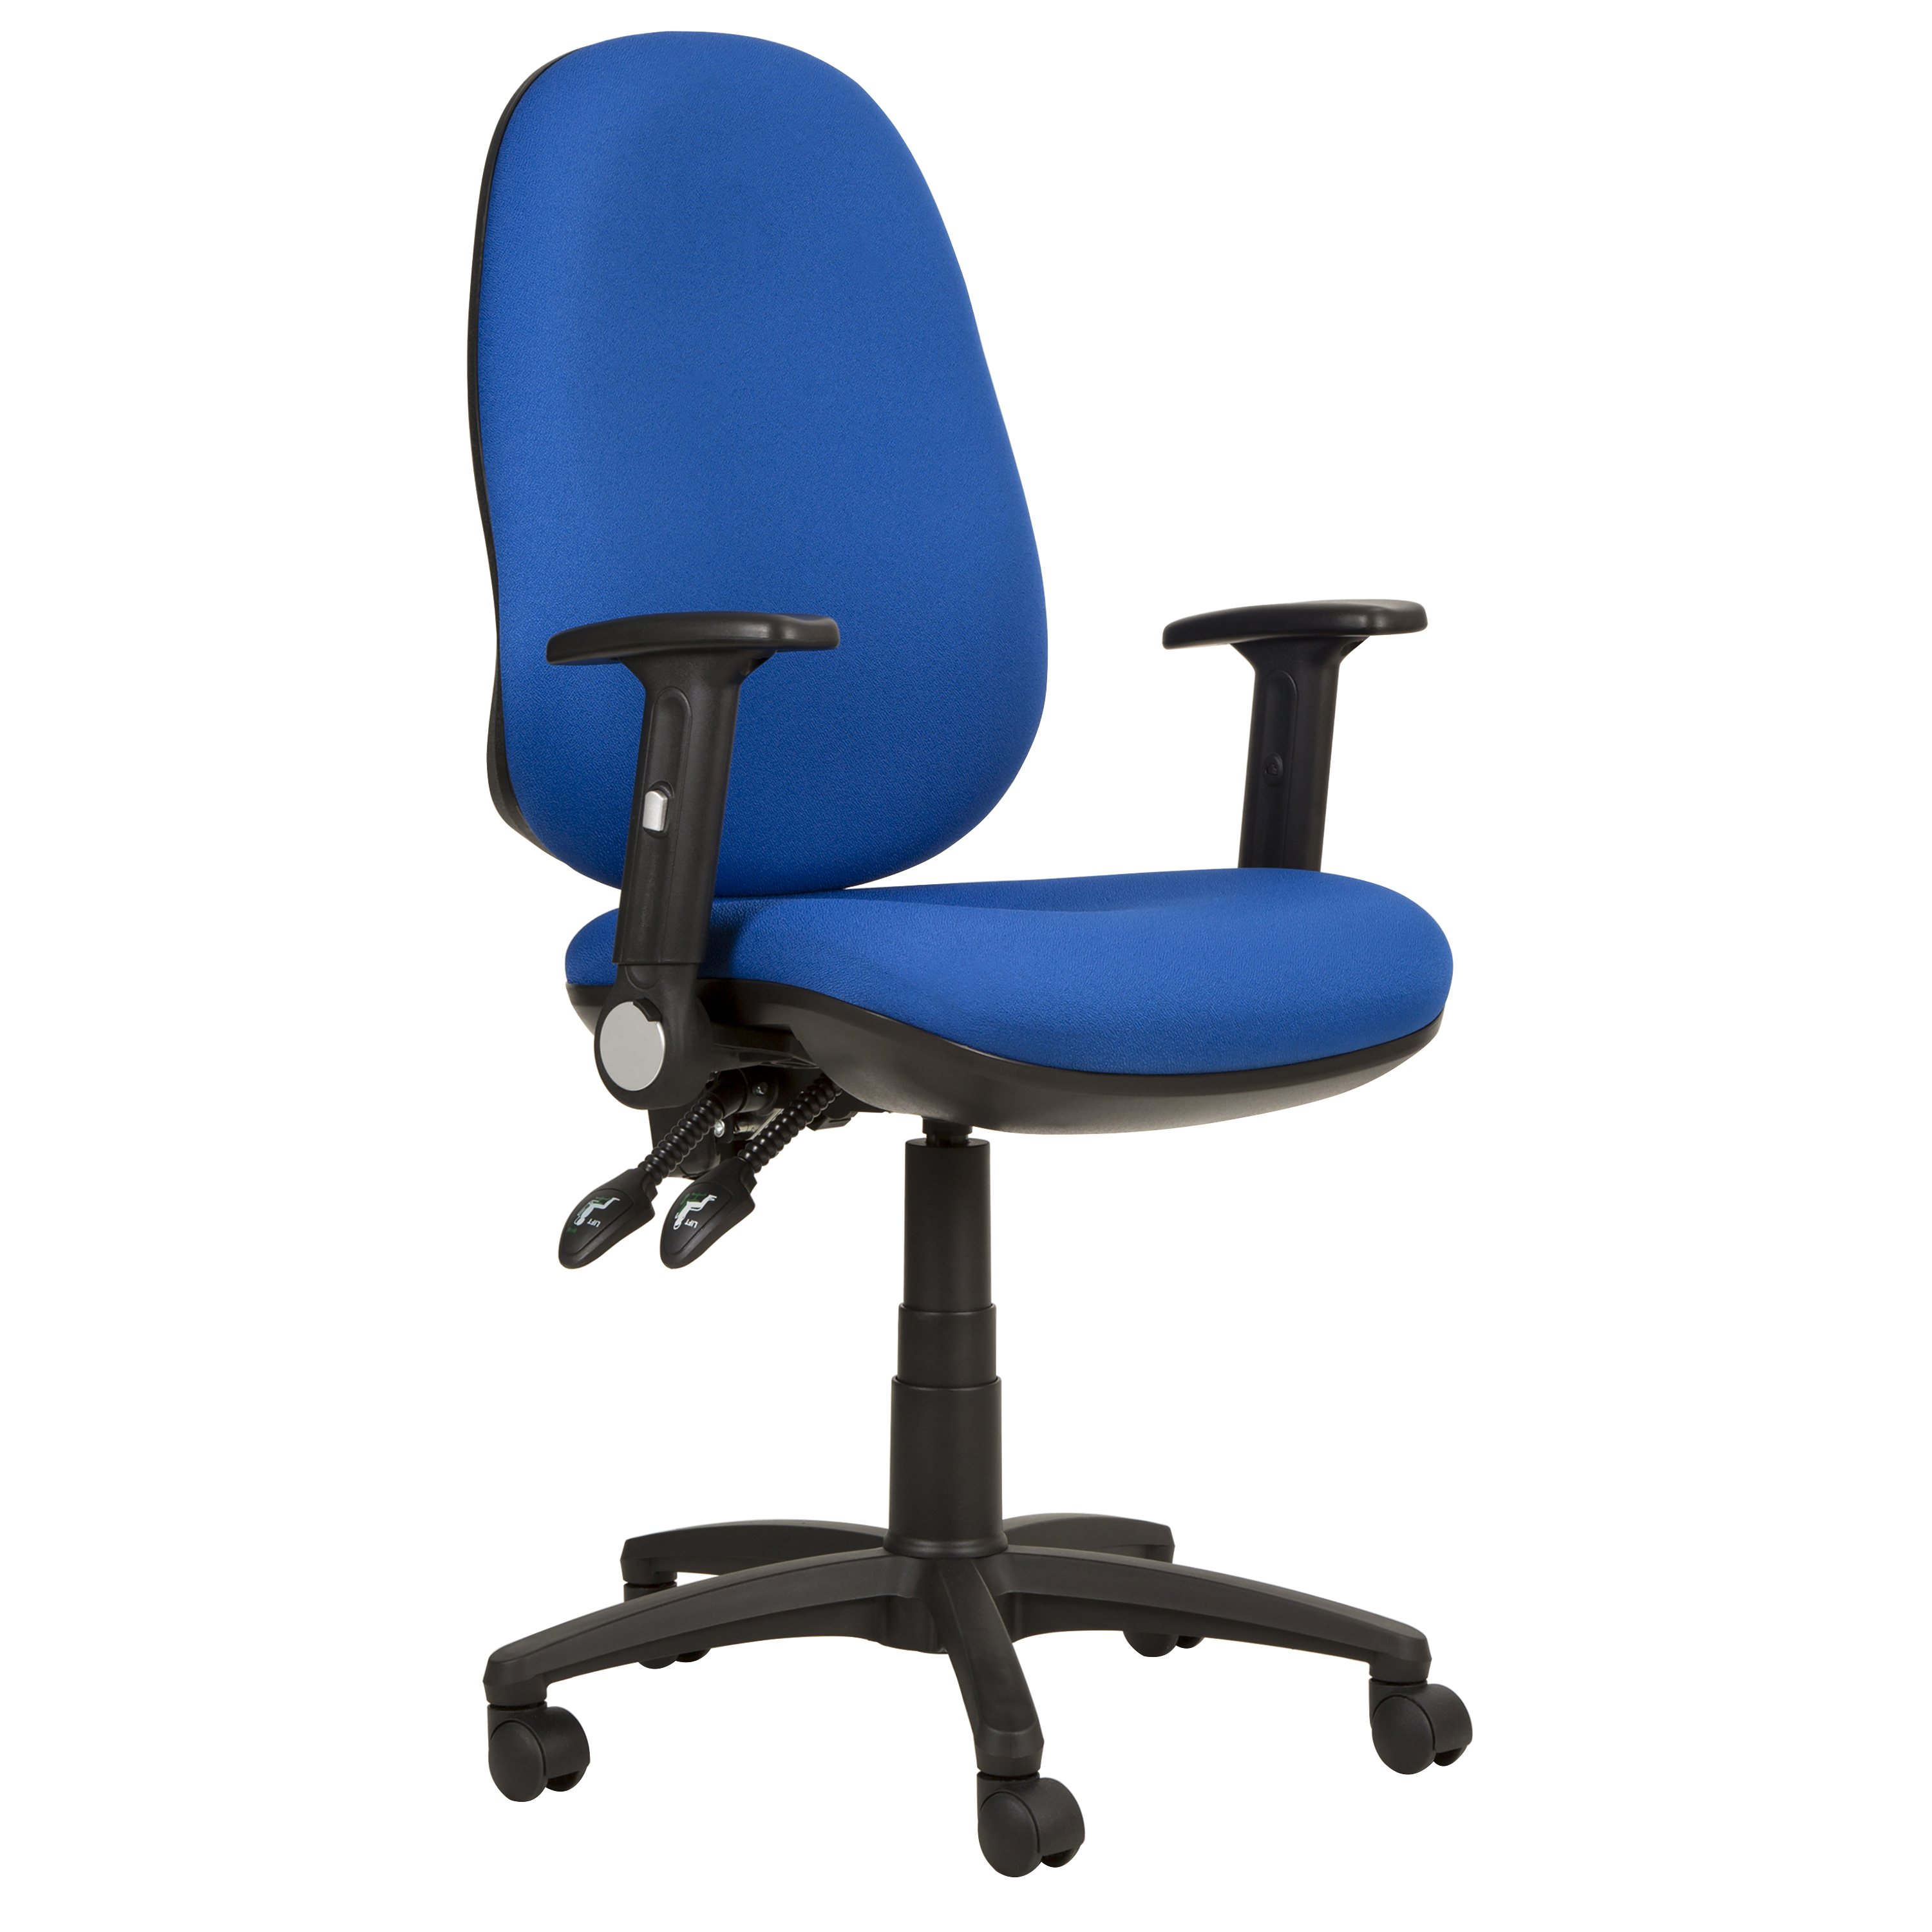 AntiMicrobial Office Chair. Available in all Camira Vita textured vinyl that has been certified. Fixed , adjustable or folding arms available 